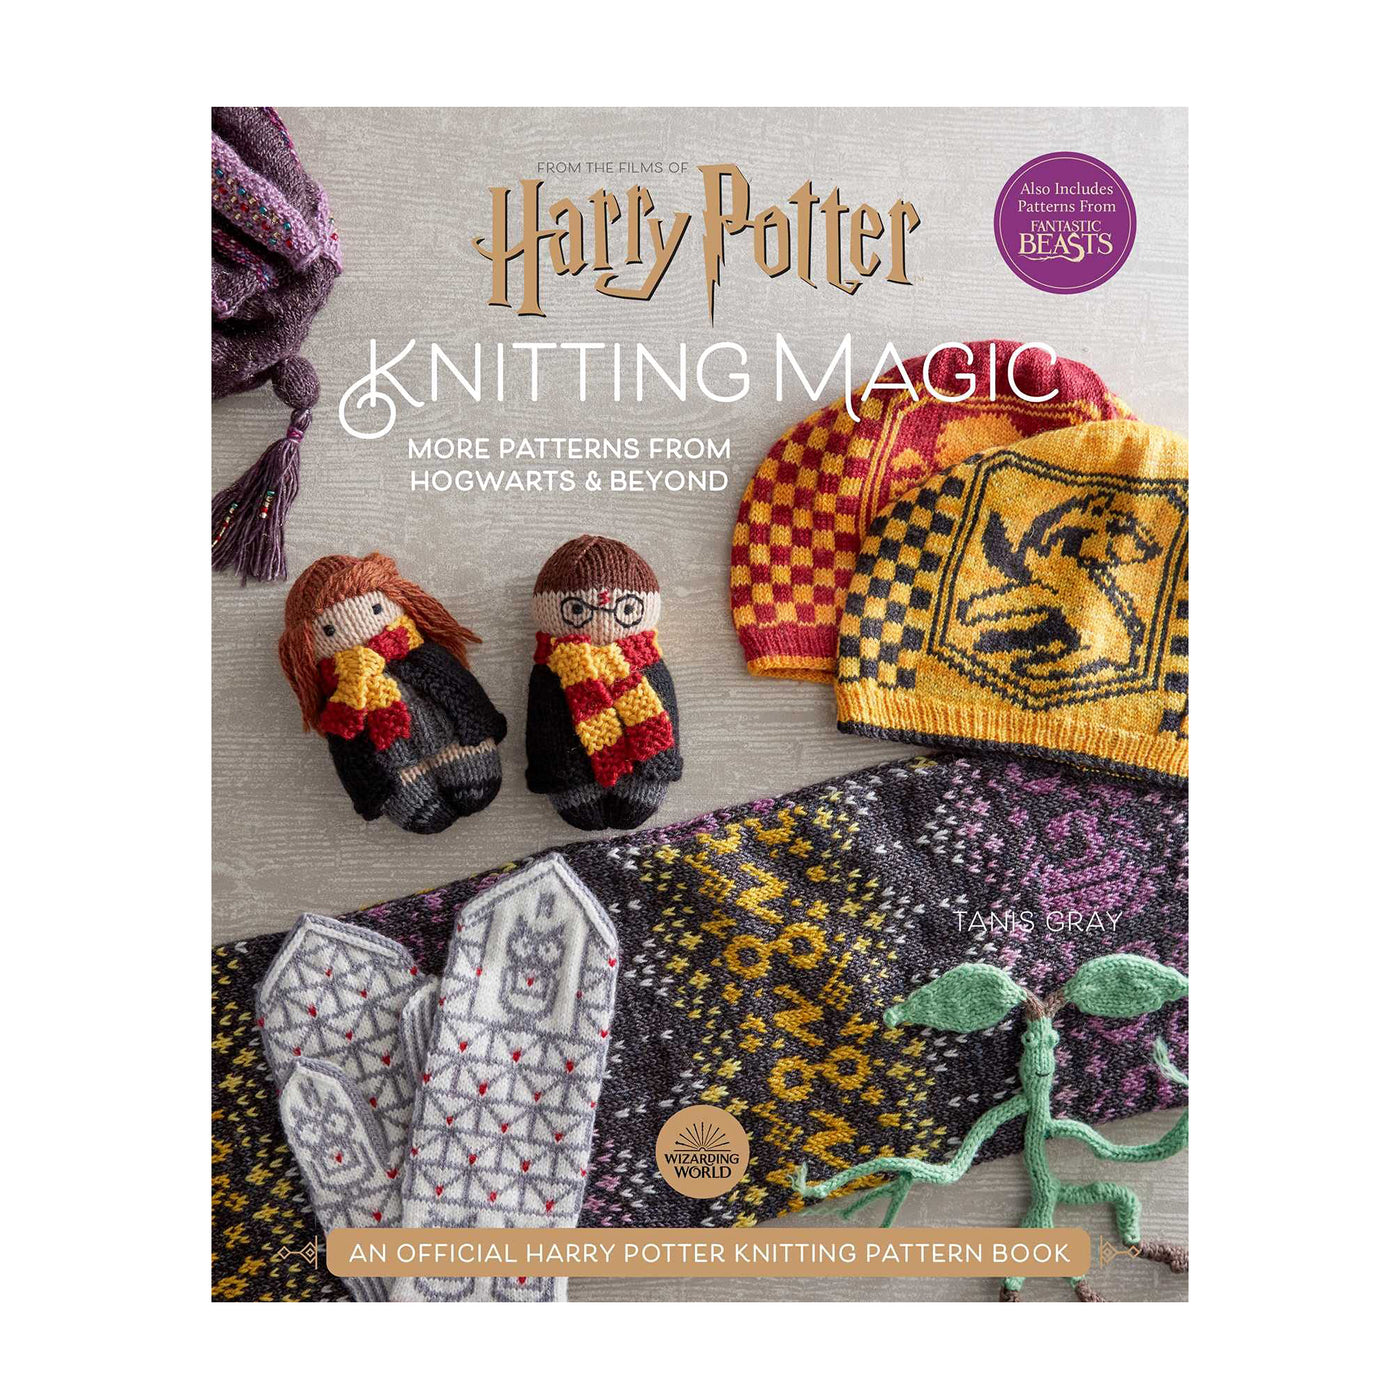 Harry Potter: More Patterns from Hogwarts and Beyond